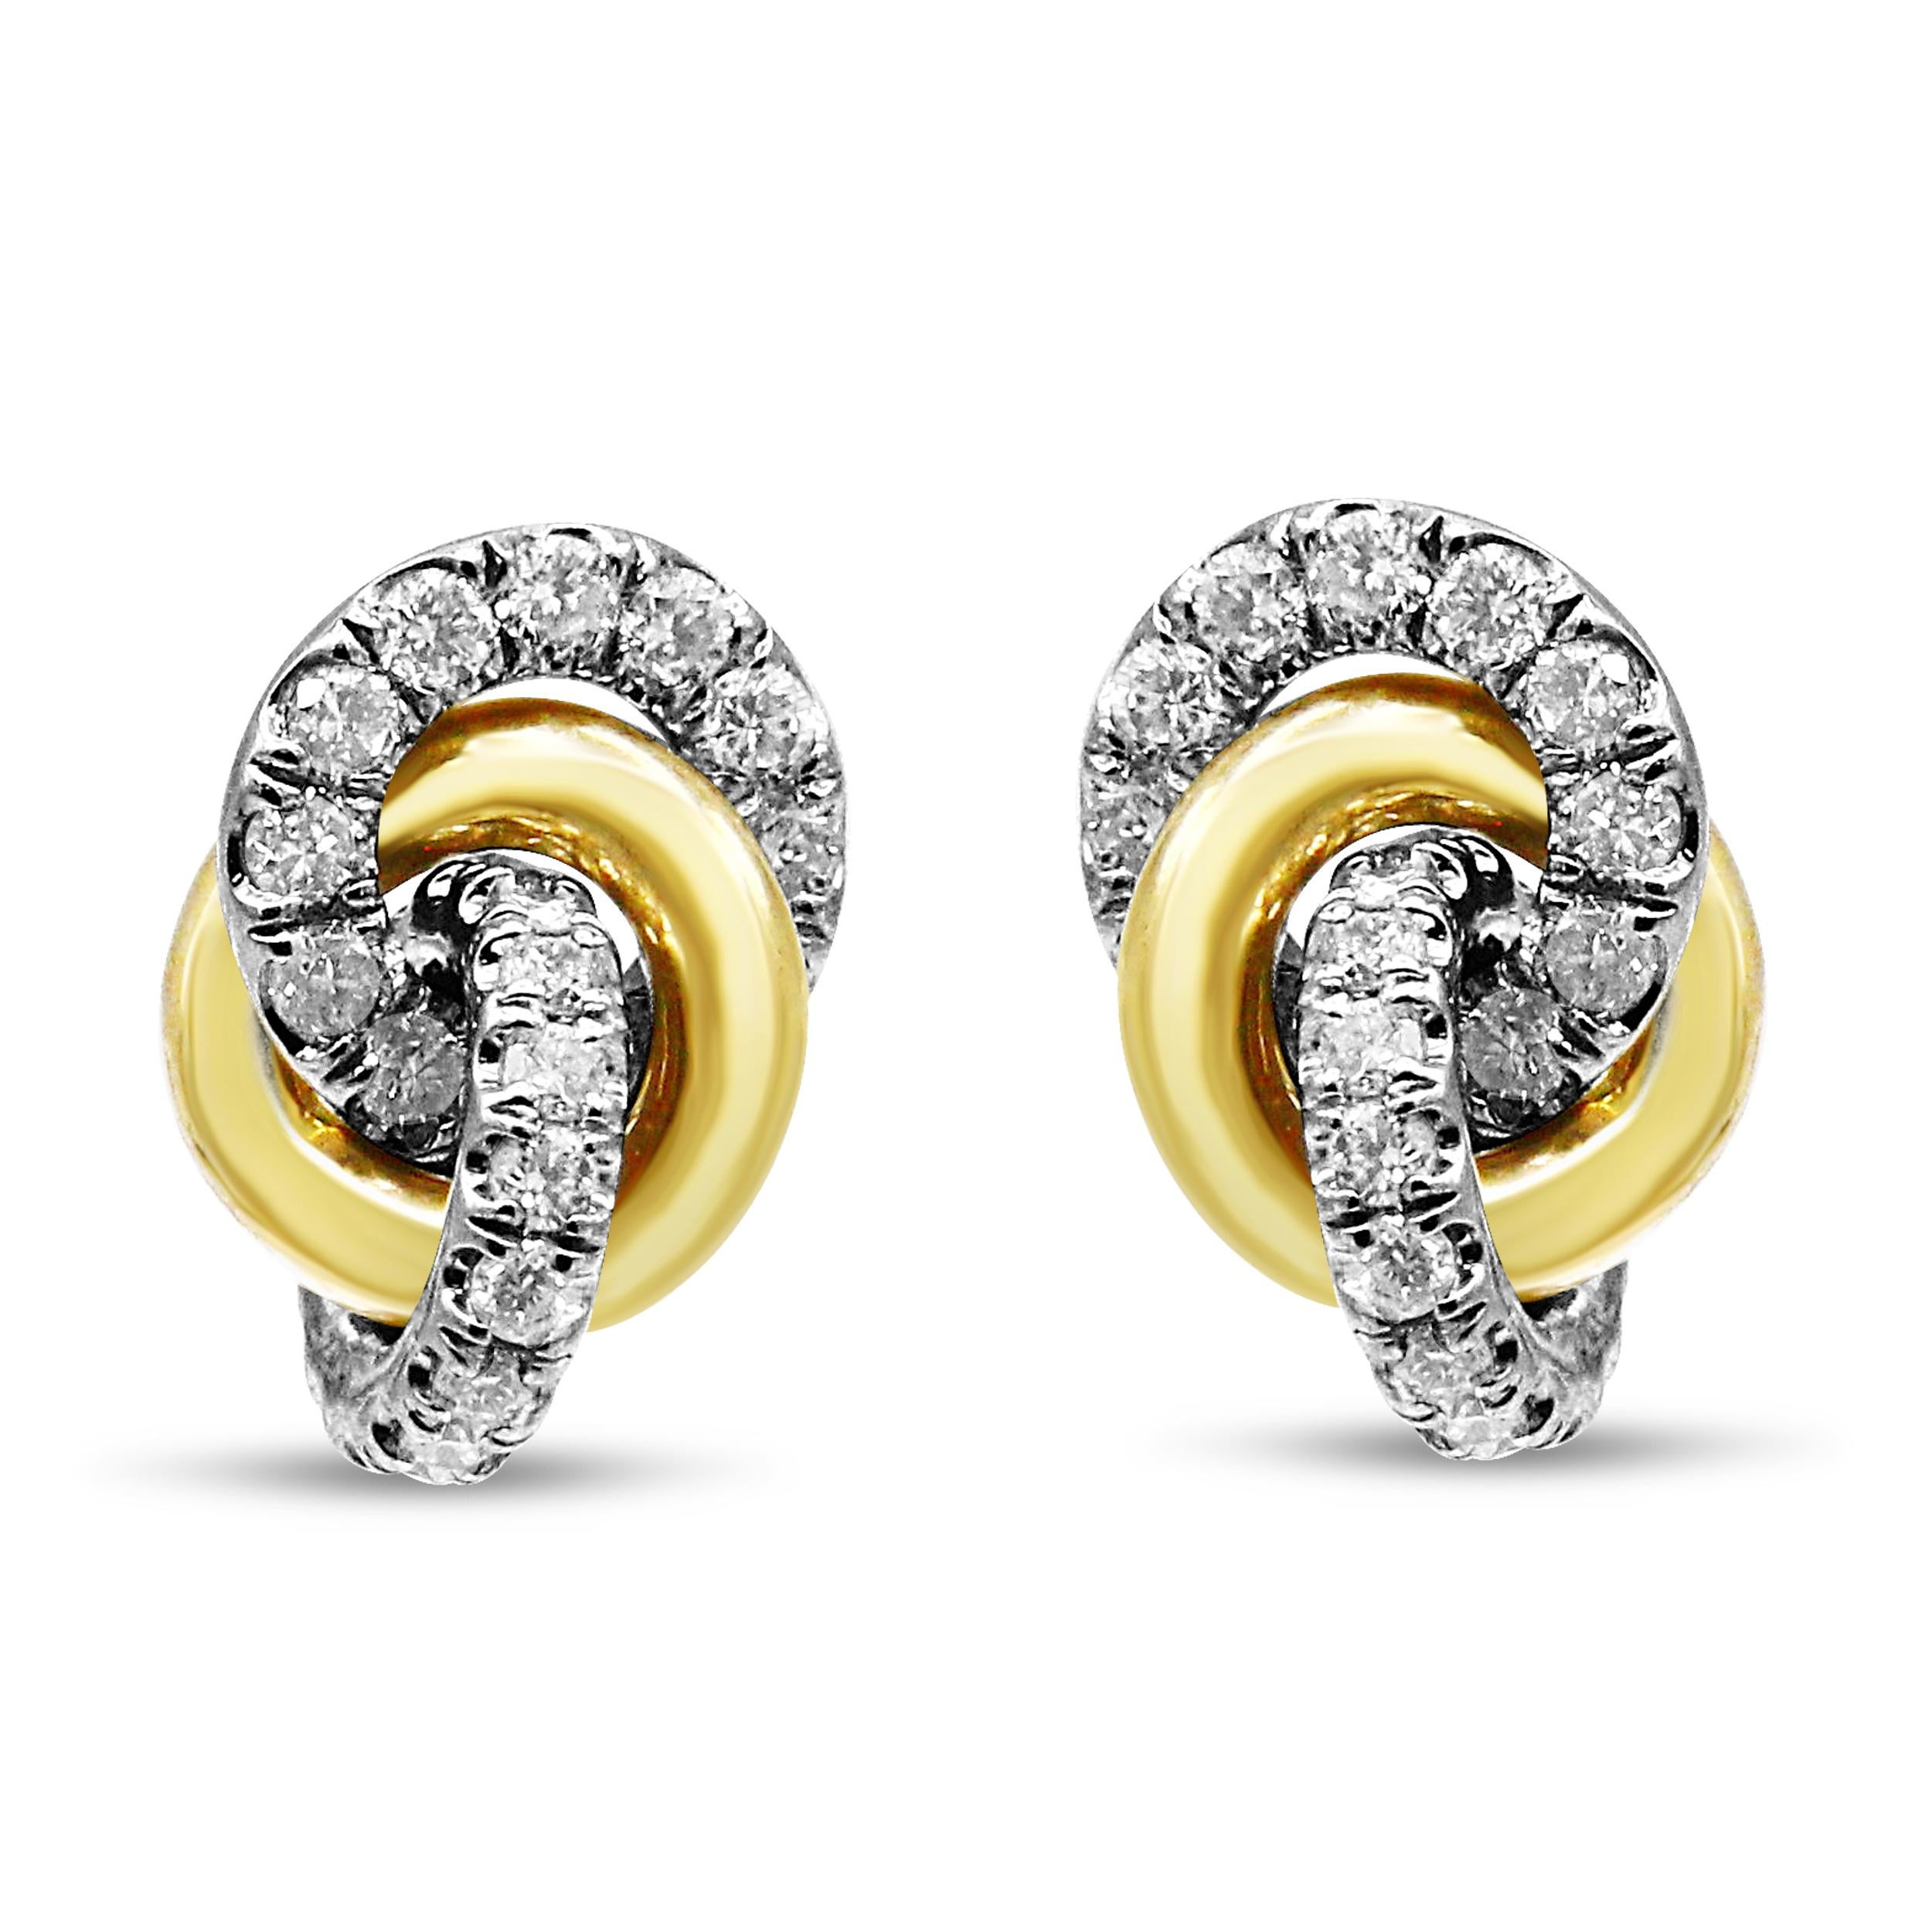 Indulge your jewelry collection and add luxurious drama to any look with these stunning diamond fashion earrings! Exhibiting true artistry, this pair of earrings is a vision in 10k yellow and white gold. The white gold dazzles with a collection of